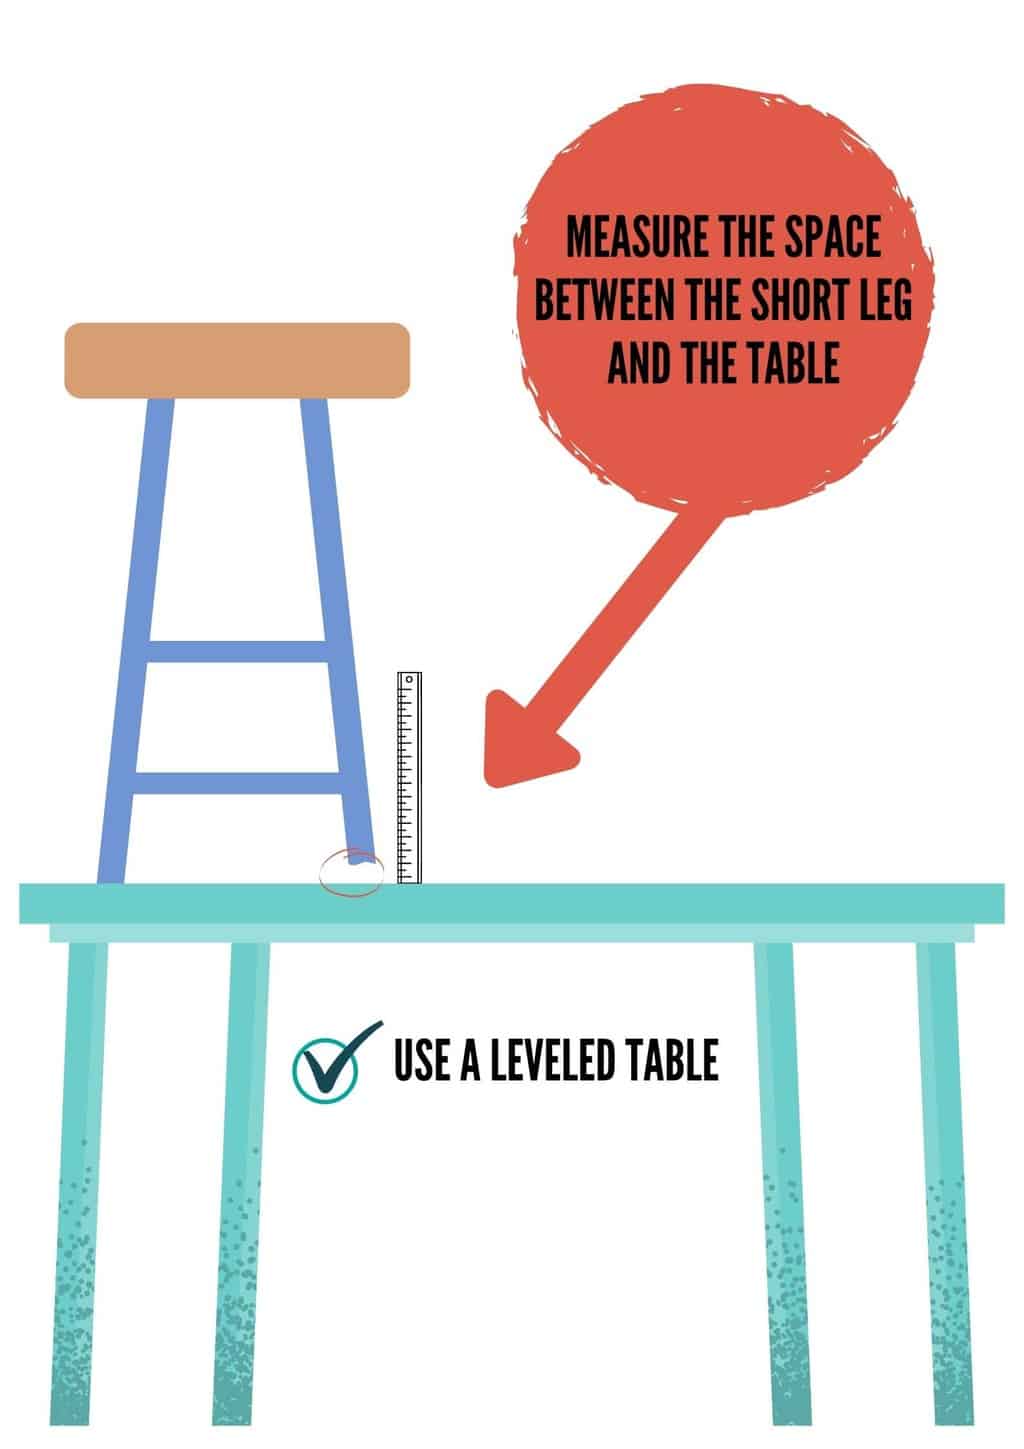 use a leveled table to measure the space between the short leg and the table